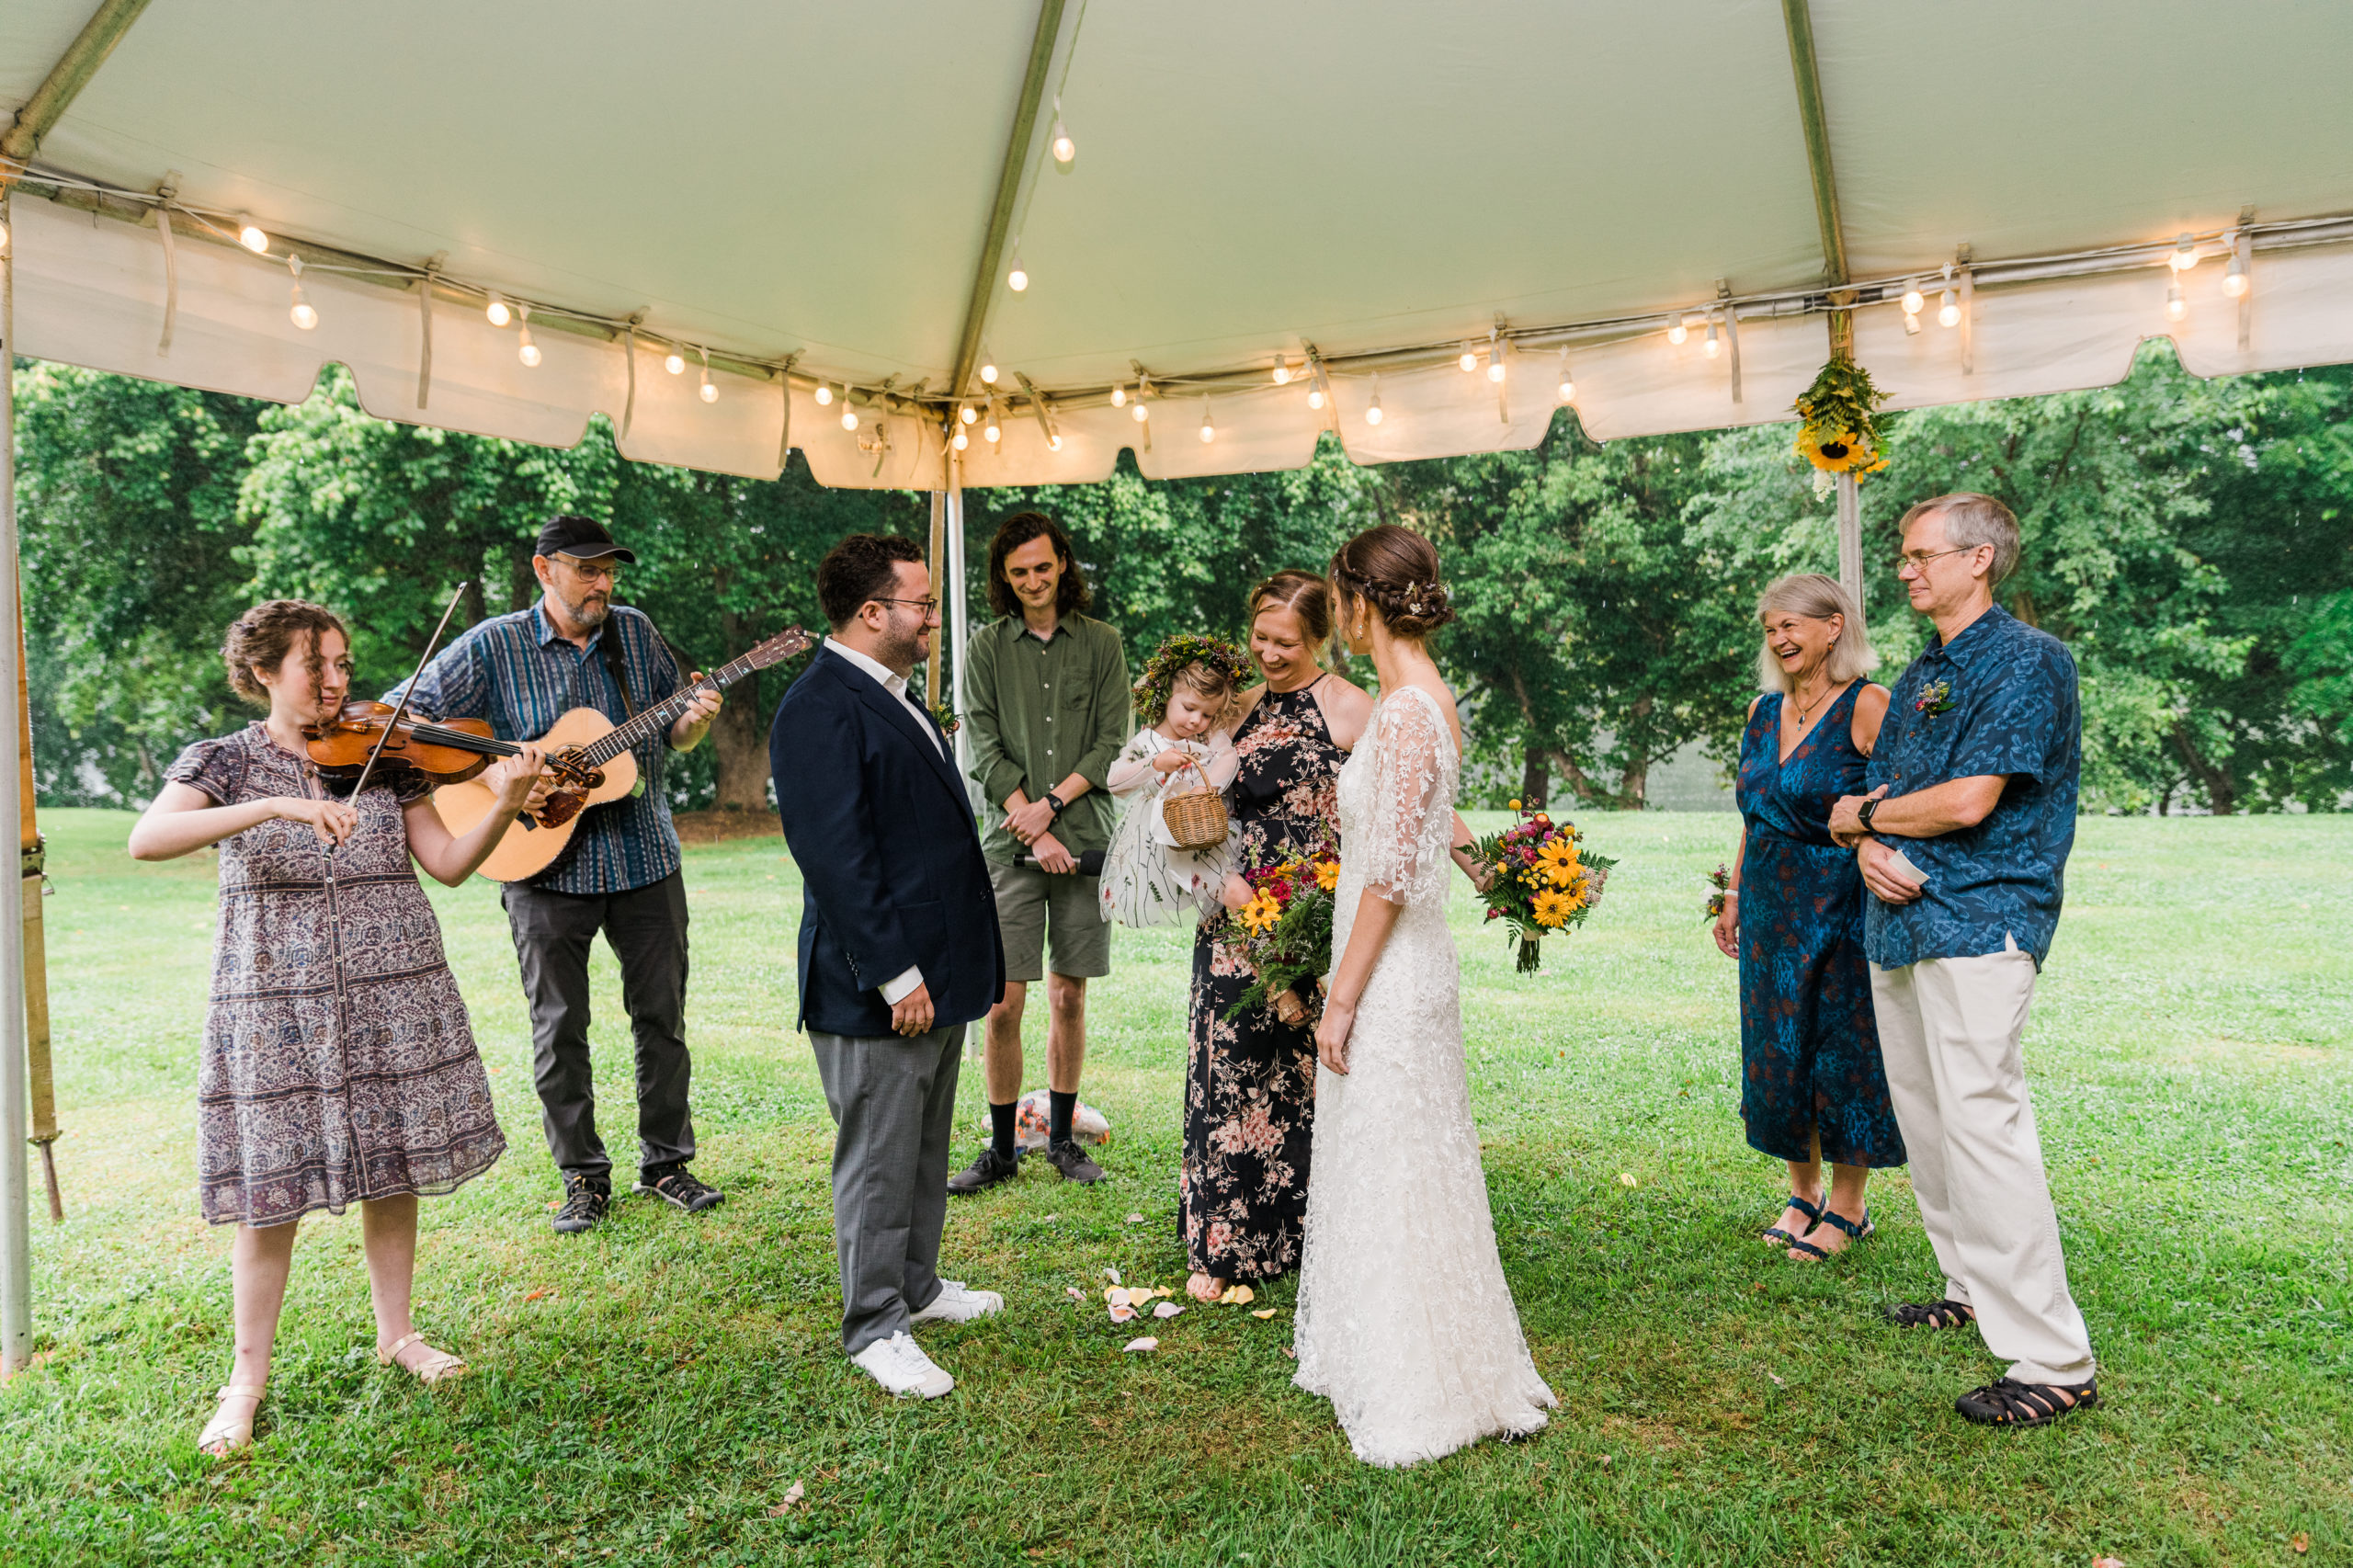 A bride and groom standing under a tent surrounded by musicians playing instruments